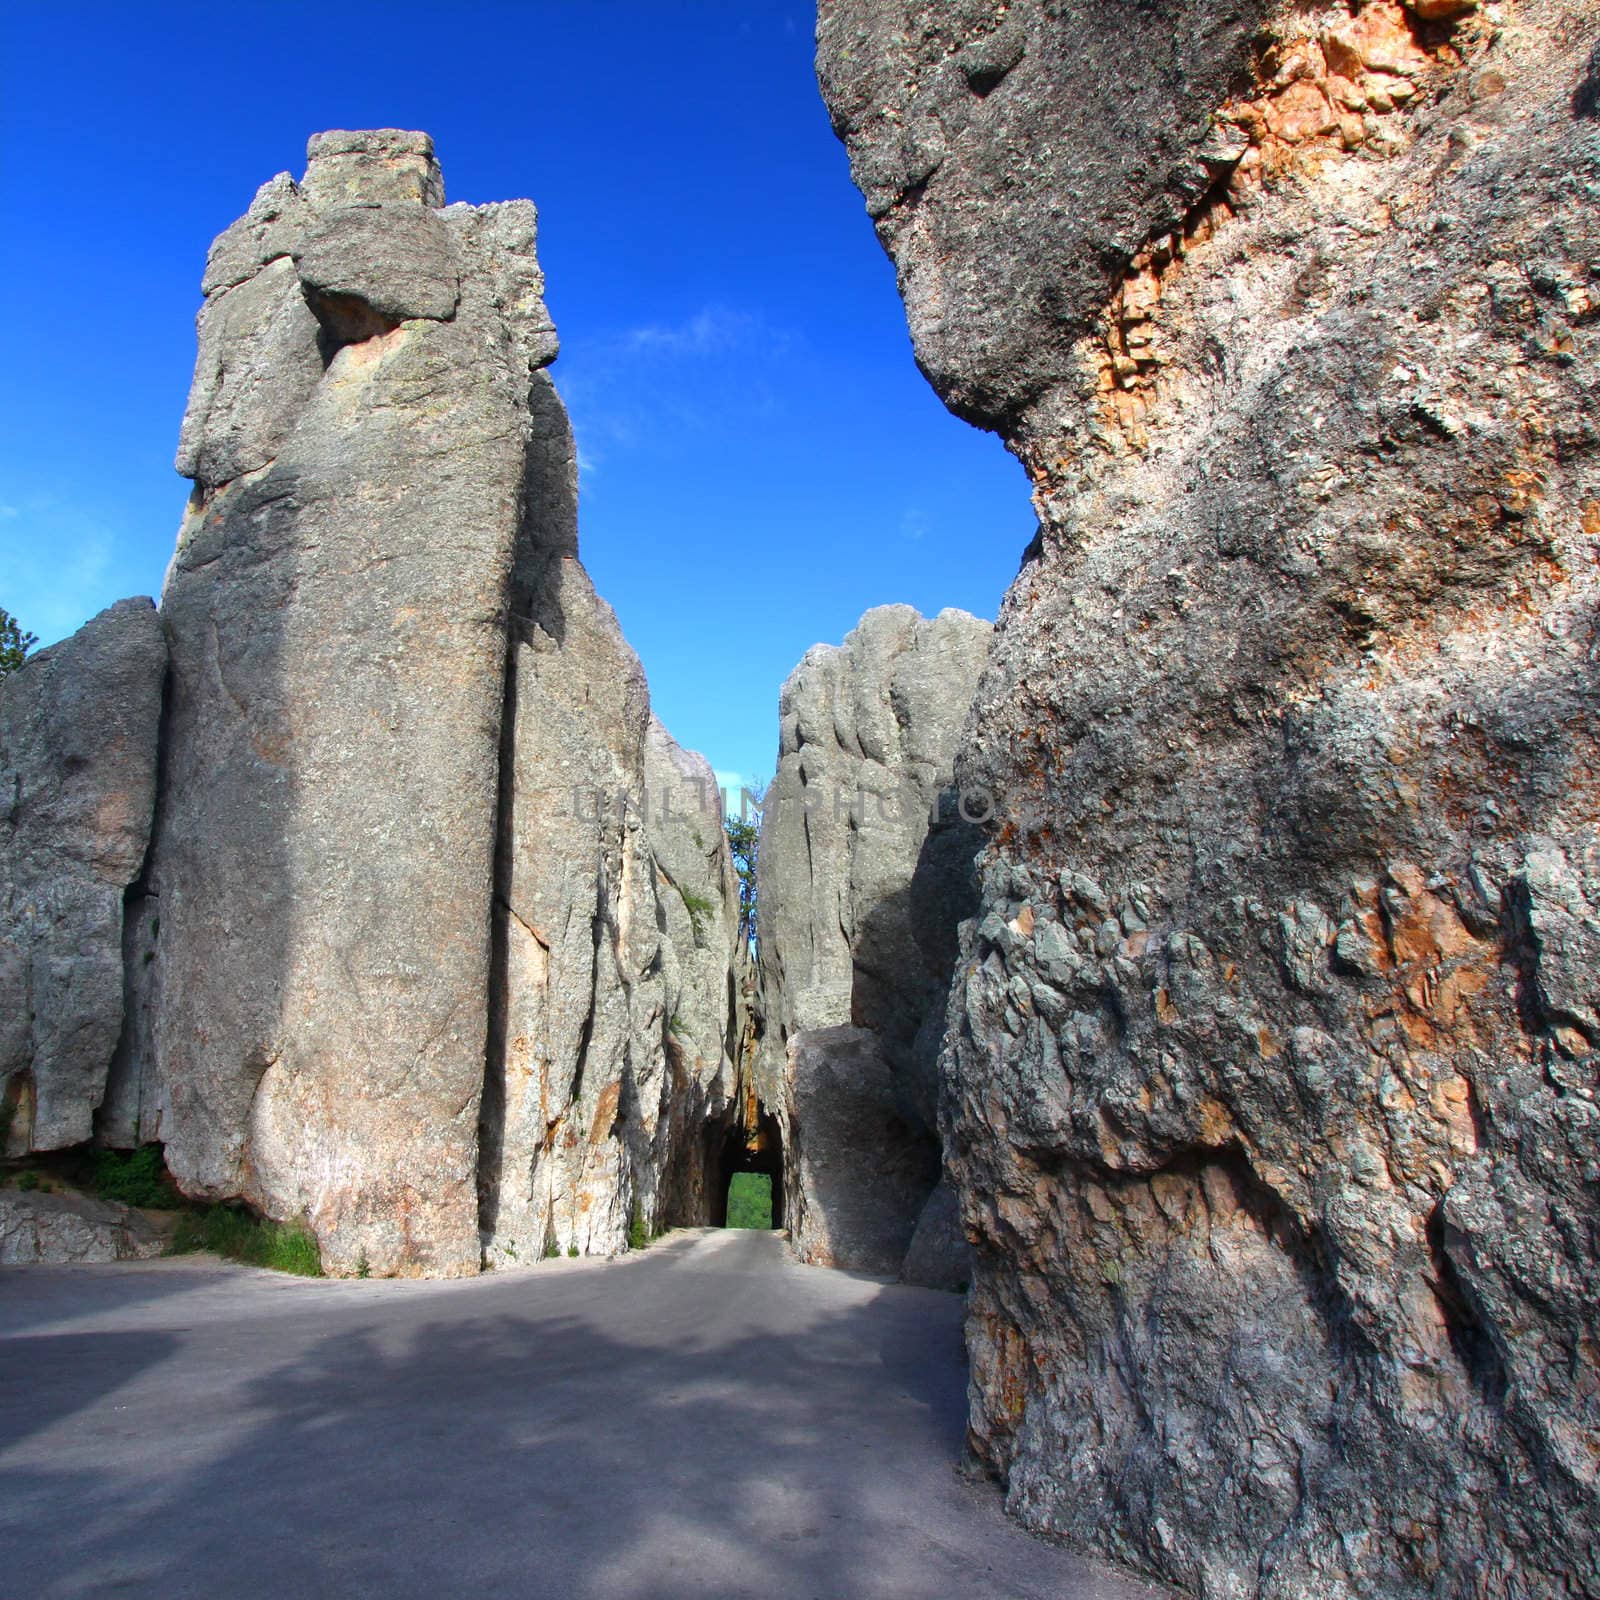 Narrow one lane tunnel through solid rock along the scenic Needles Highway of South Dakota.